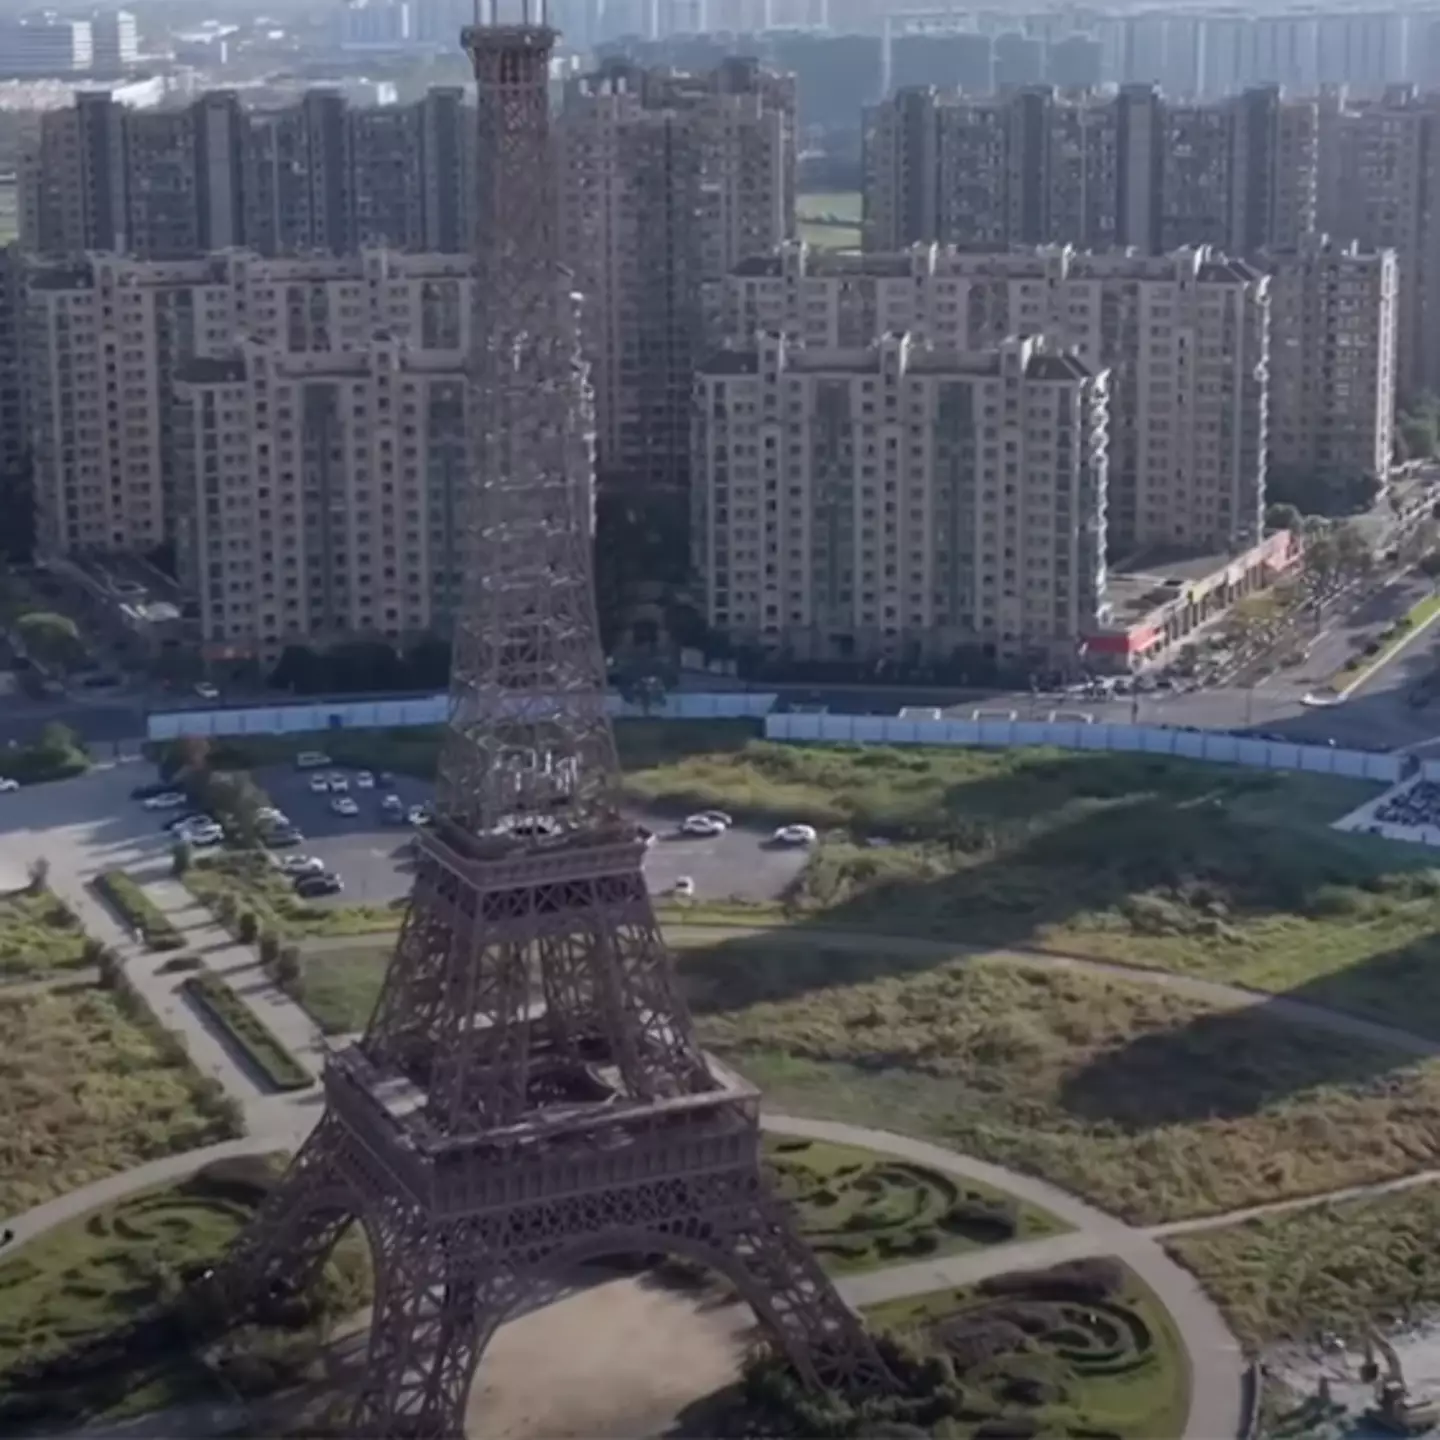 Inside China’s £1,000,000,000 copy of Paris complete with Eiffel Tower that’s turned into a 'ghost town'